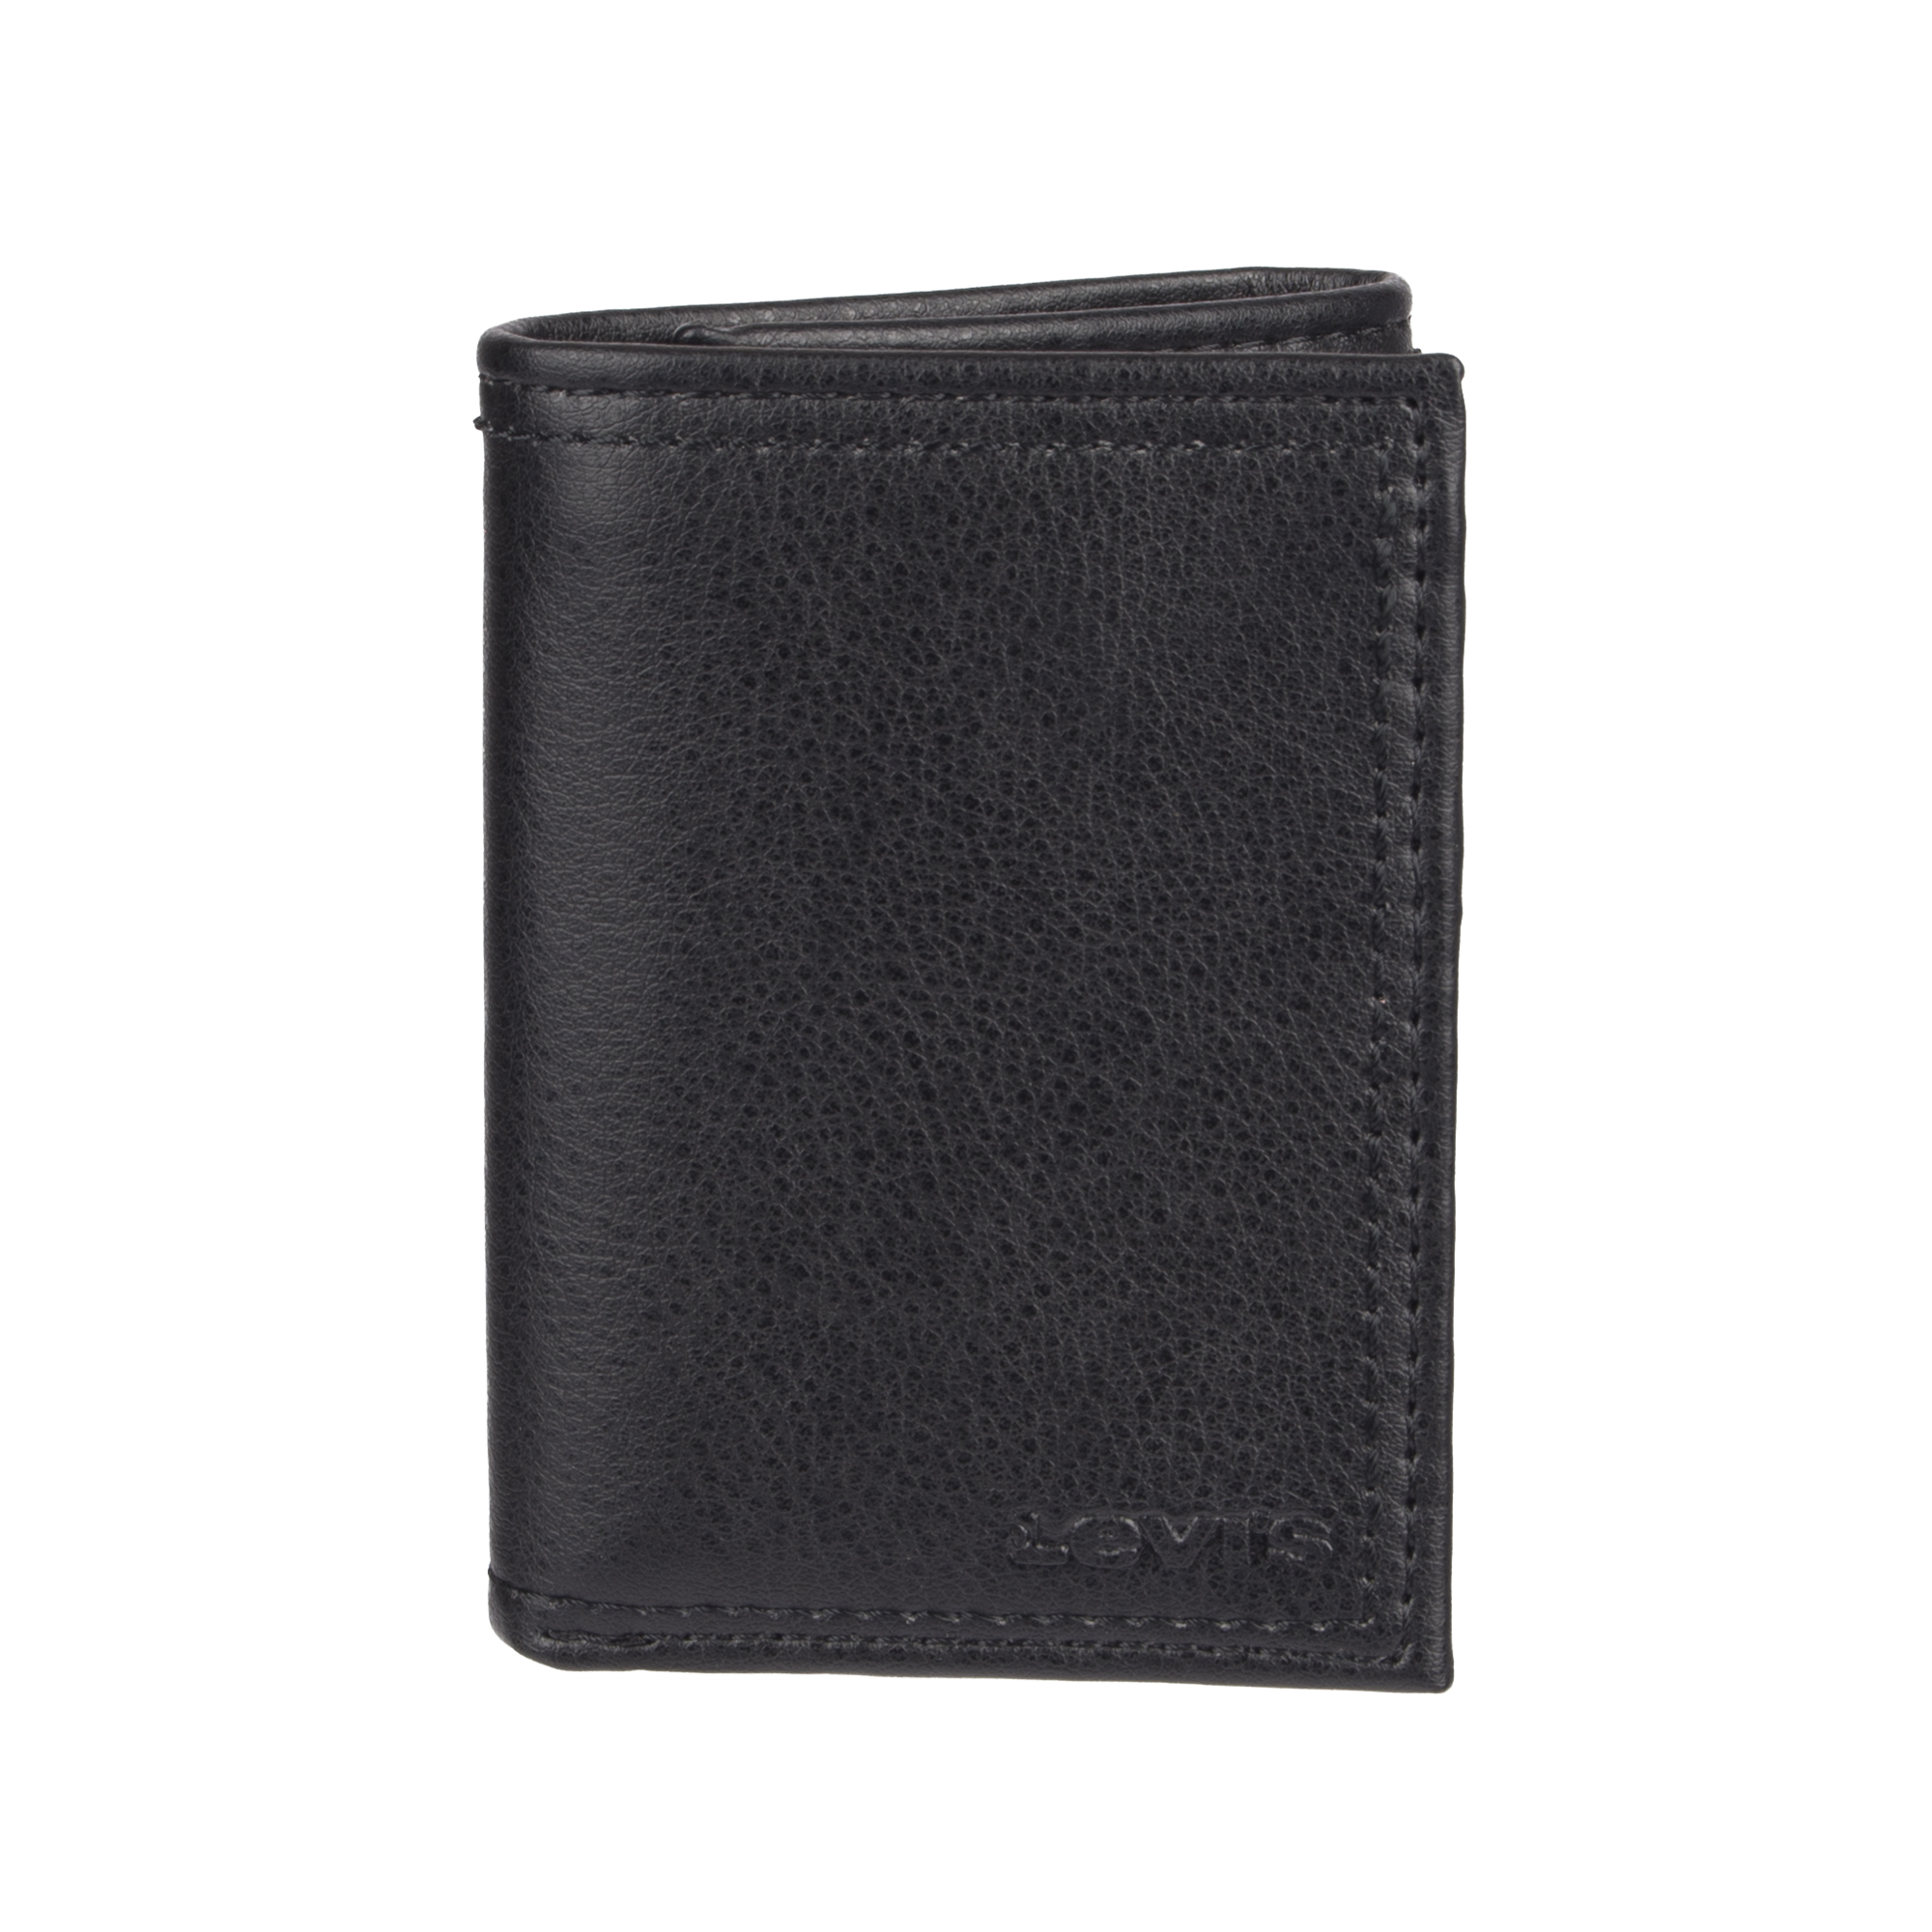 Levi's Men's Black RFID Trifold Wallet with Interior Zipper - image 1 of 5